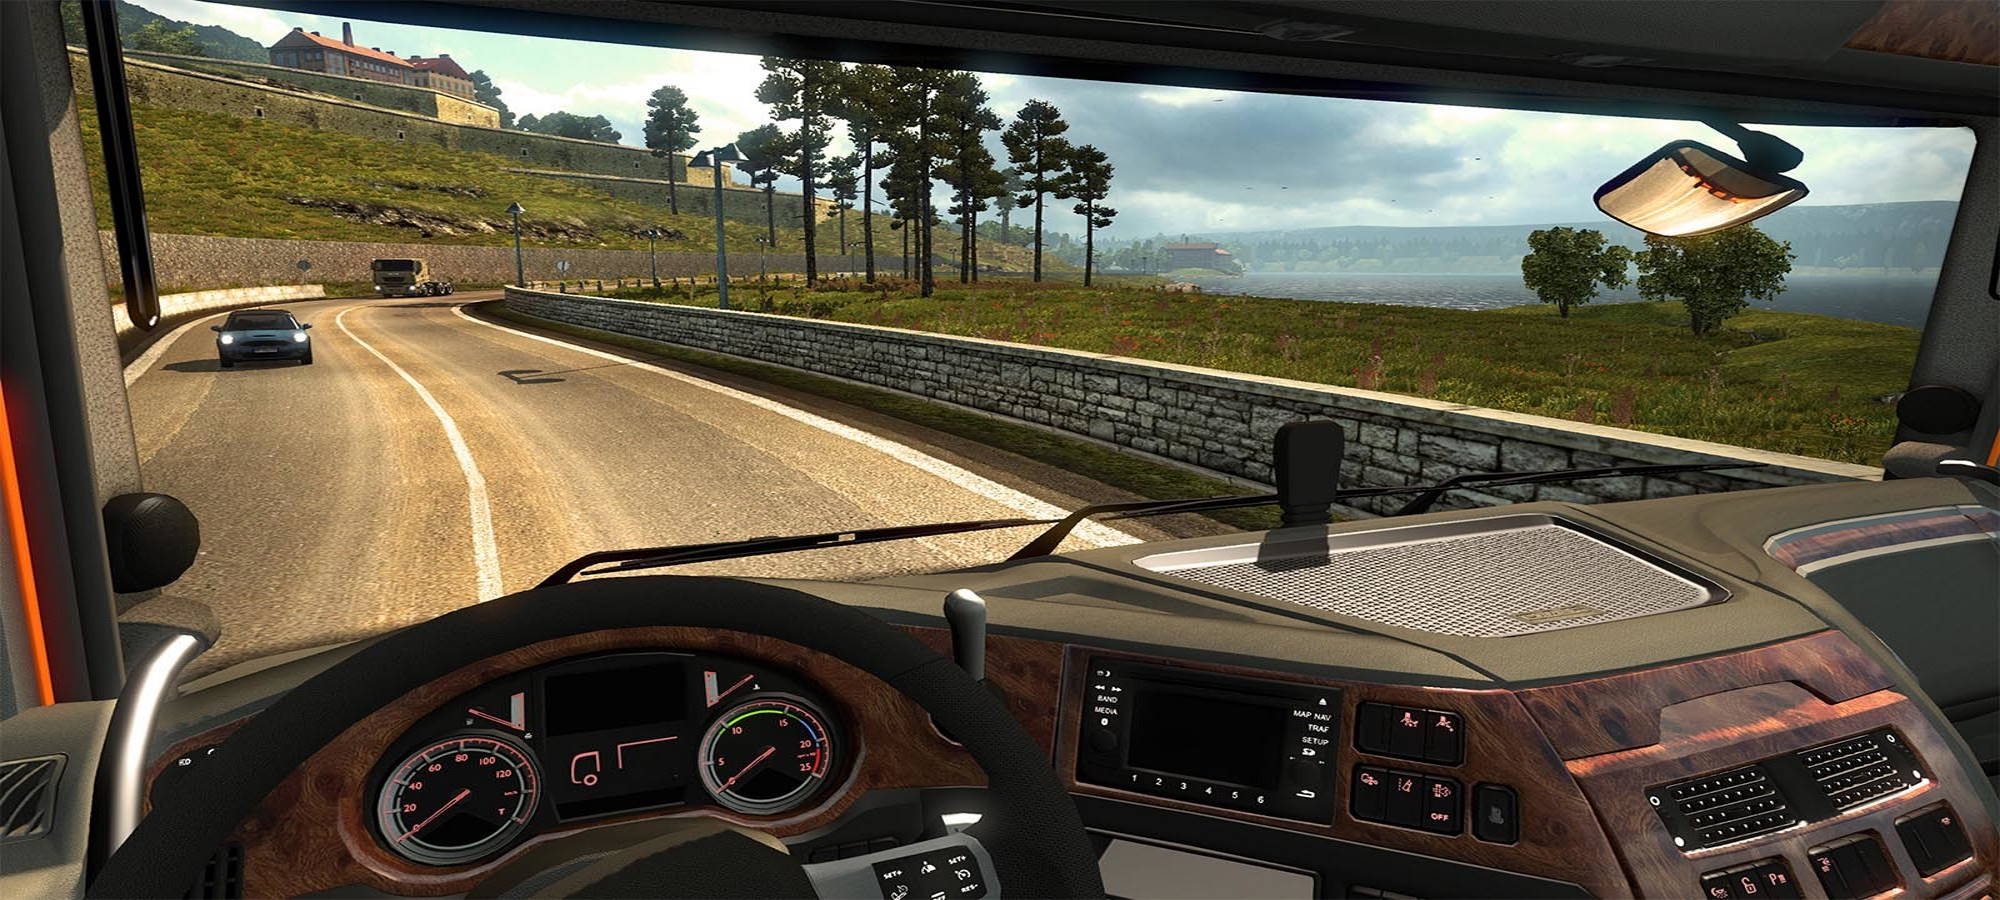 Aura Sync lights the way in Euro Truck Simulator 2. ROG of Gamers Global